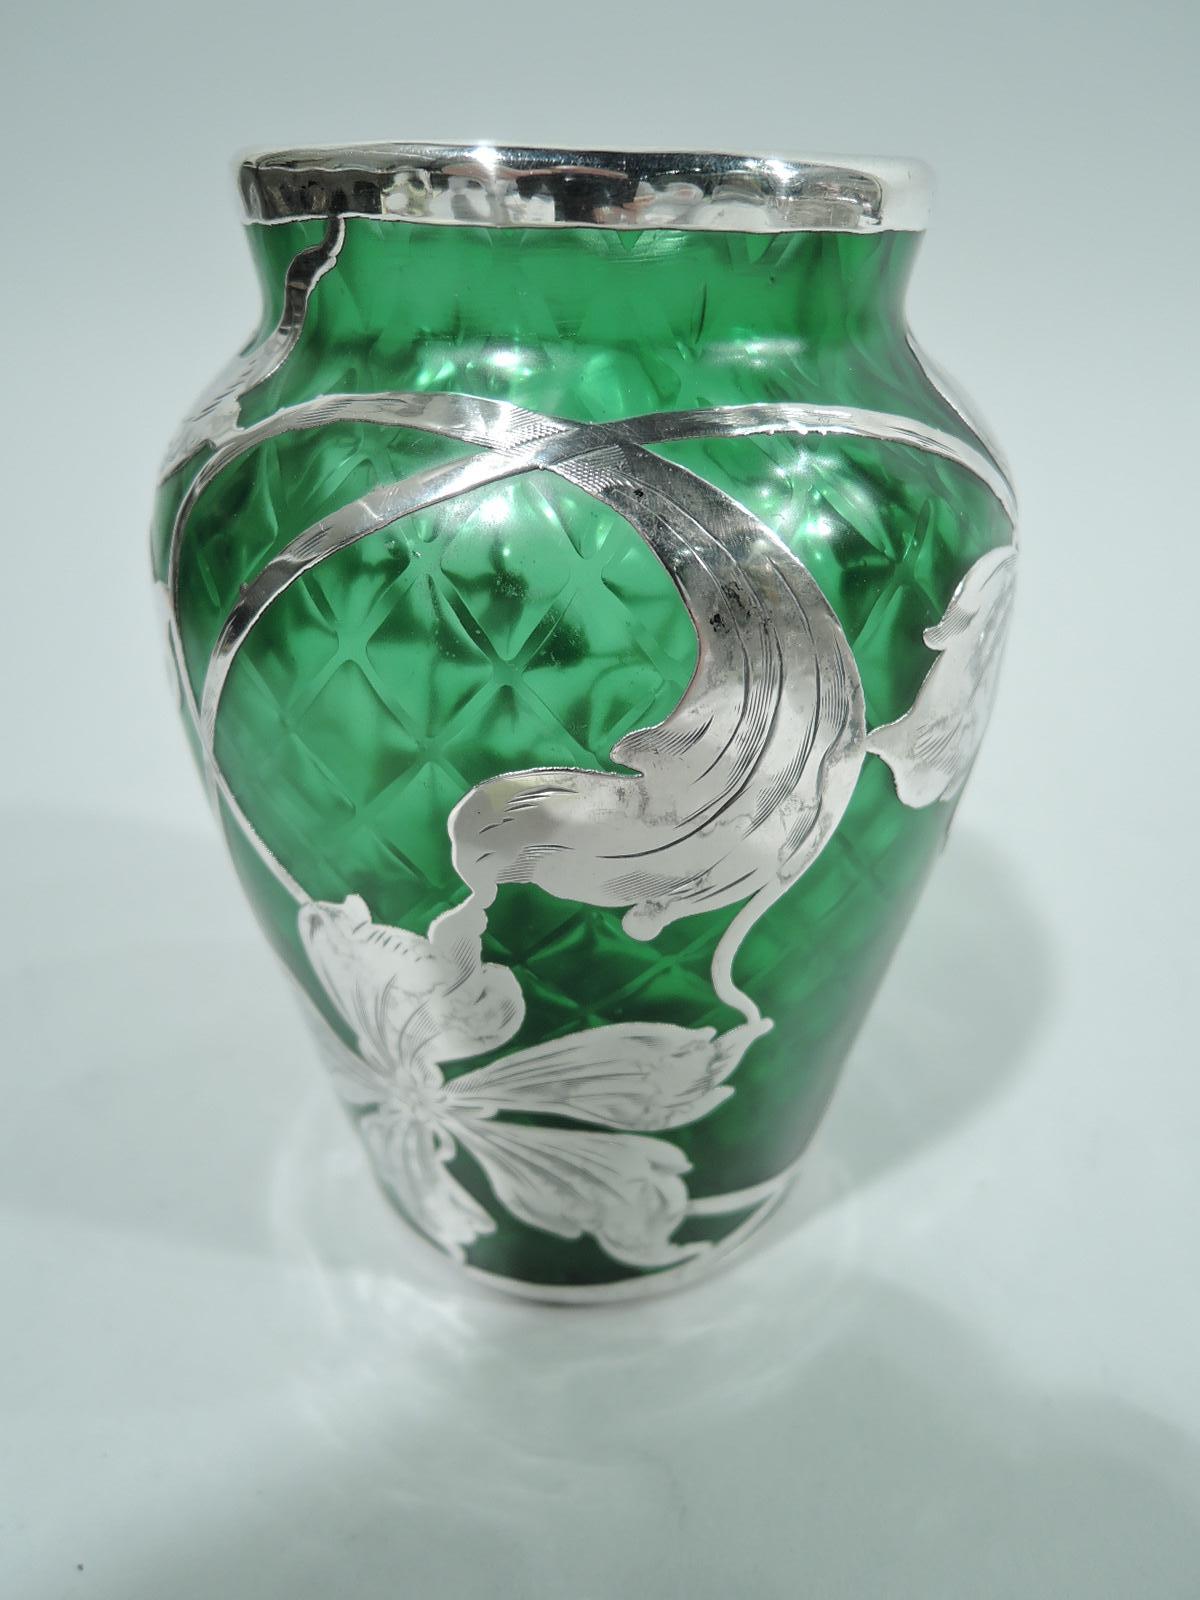 Turn-of-the-century Art Nouveau glass vase by historic Loetz with engraved silver overlay. Tapering sides, curved shoulder, and short straight neck. Overlay in form of loose, floaty flower heads and tendrils. Glass green and quilted. Pontil mark.